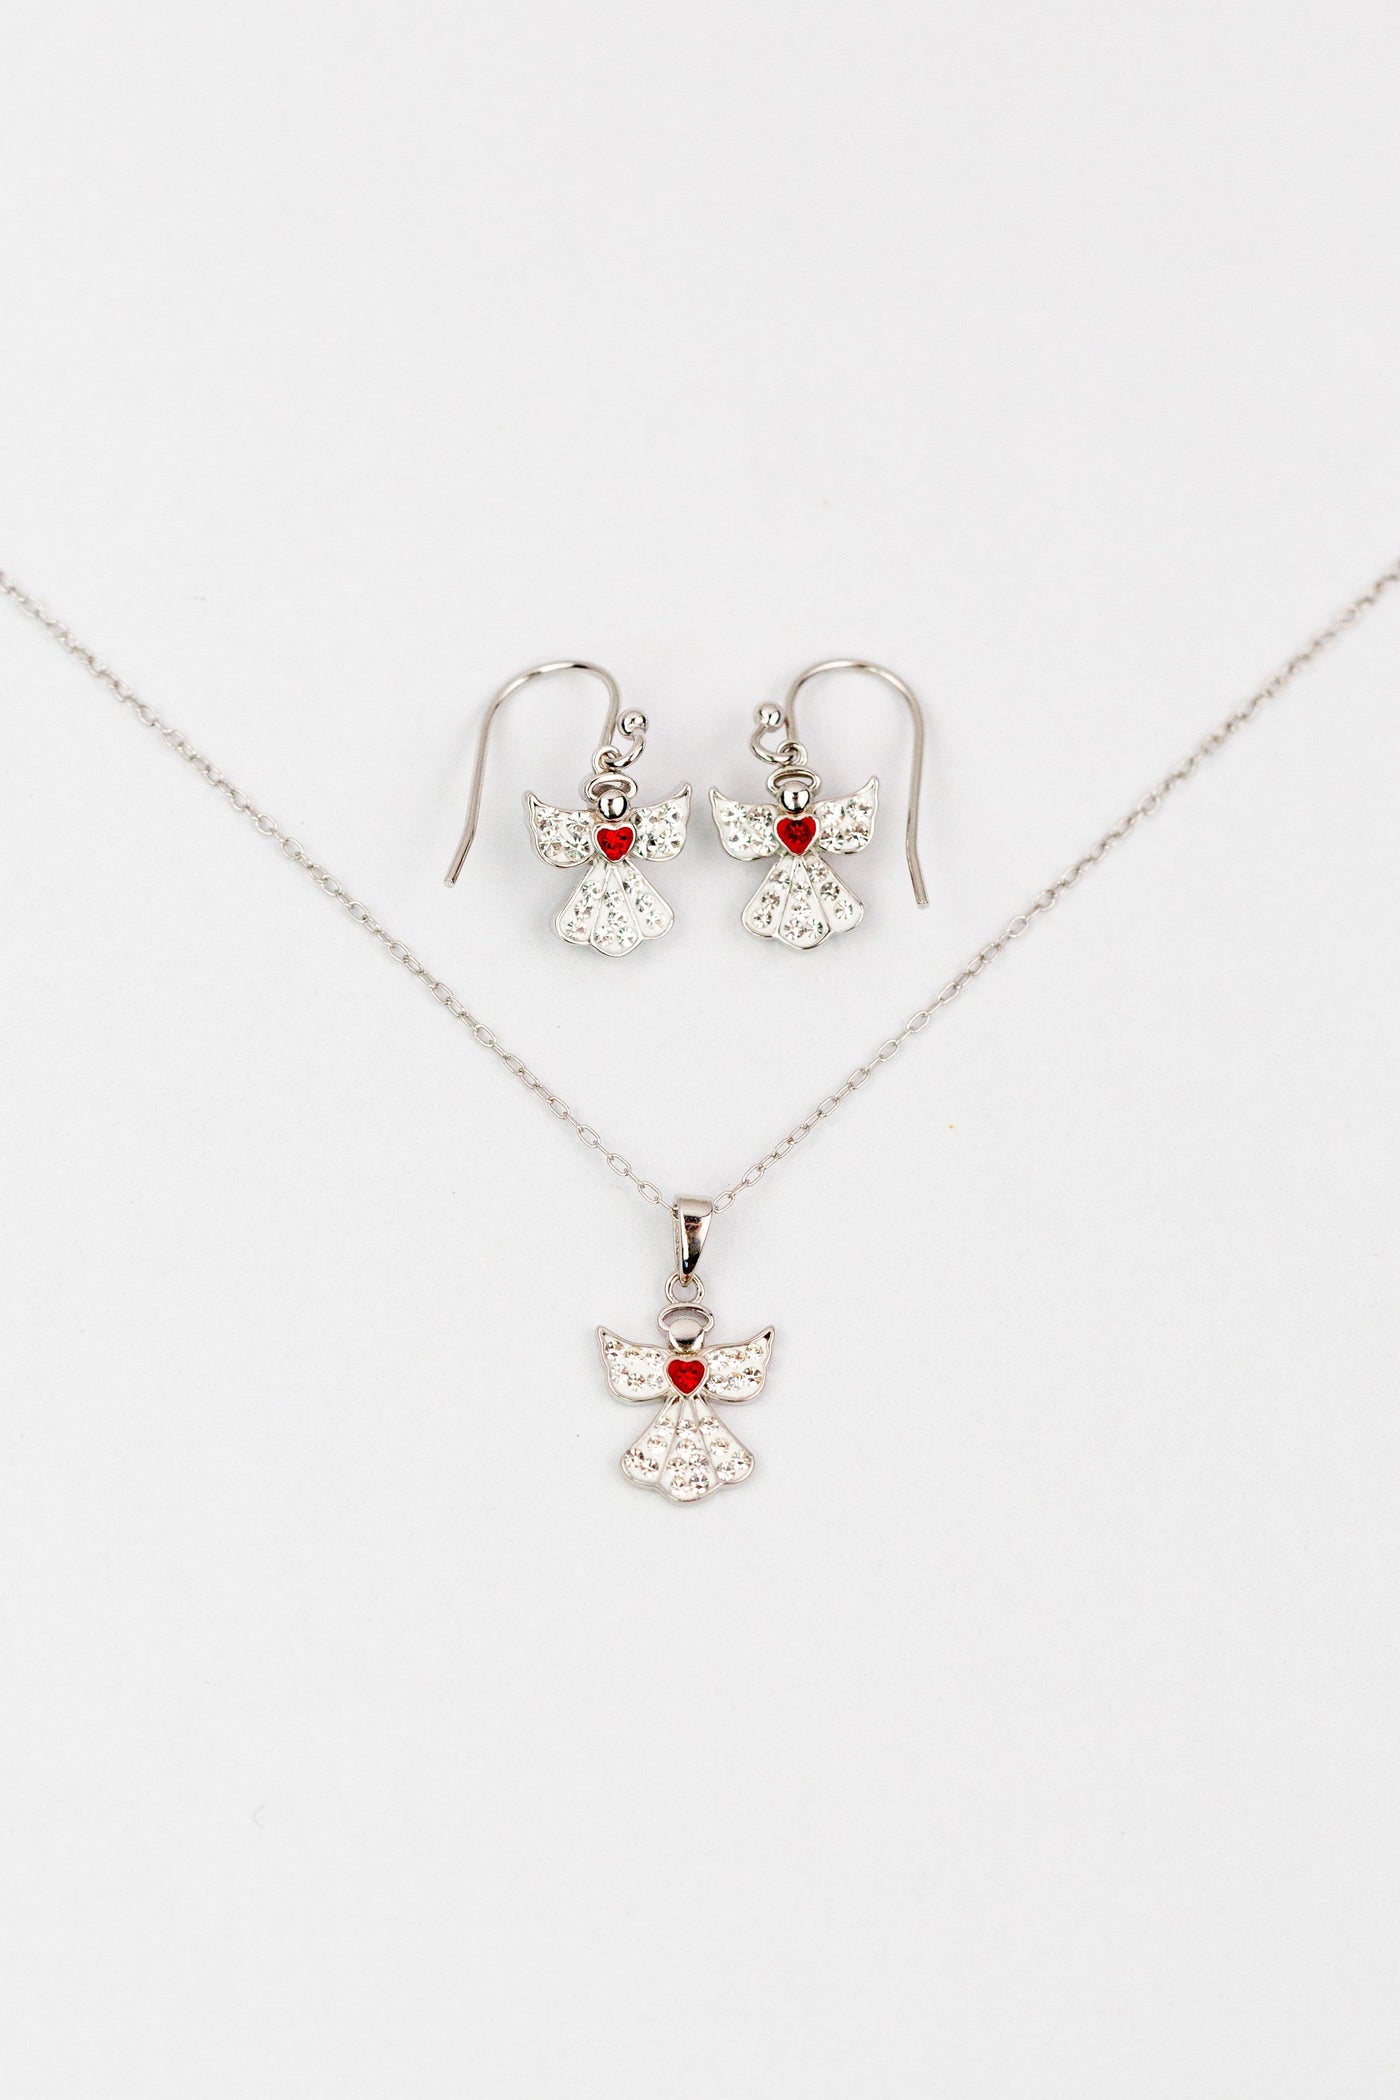 Clear Crystal Angel With Red Heart Silver Earrings and Necklace Matching Set